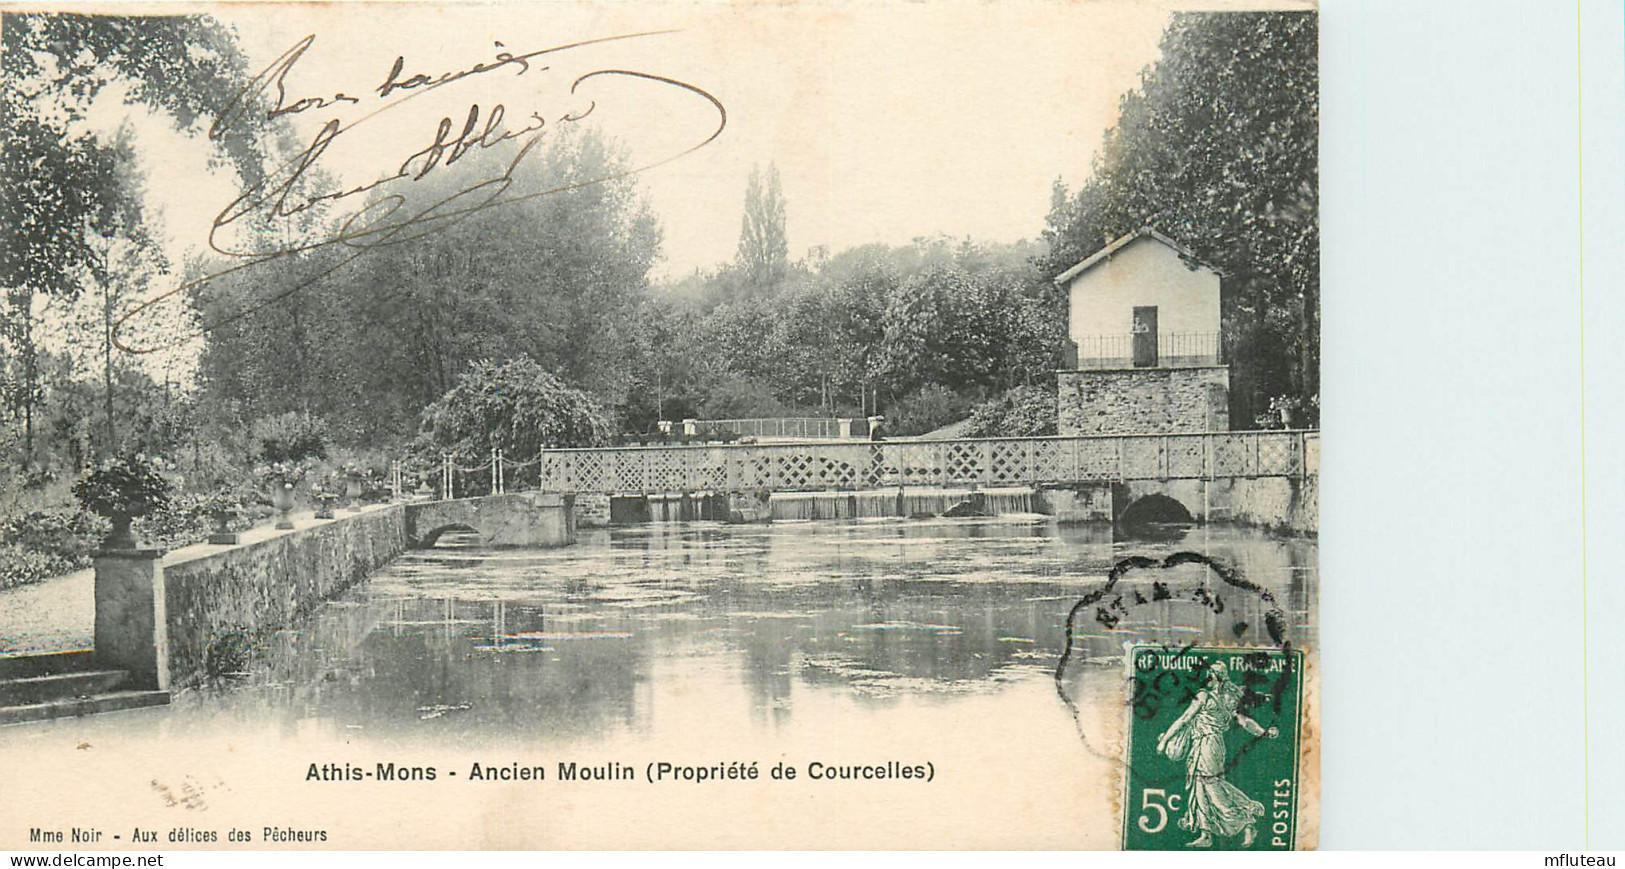 91*  ATHIS MONS Ancien Moulin  Propriete  De Courcelles    RL10.0019 - Athis Mons